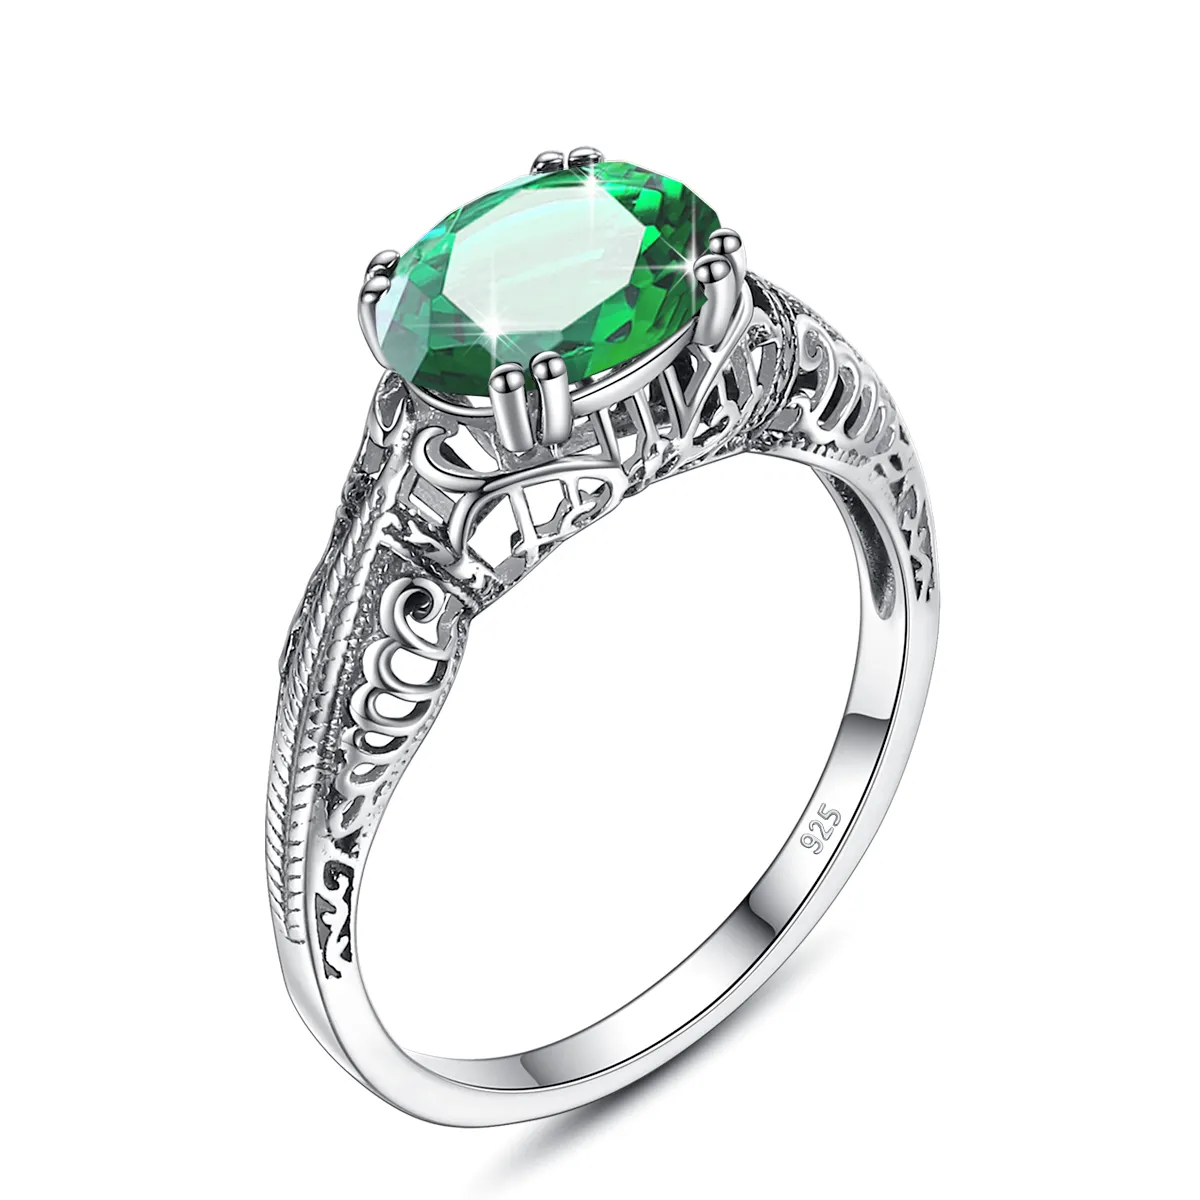 Art Deco Style 925 Rings Silver Women Particular Vintage Emerald Jewelry 100% Solid Sterling Silver Christmas Mom Gift